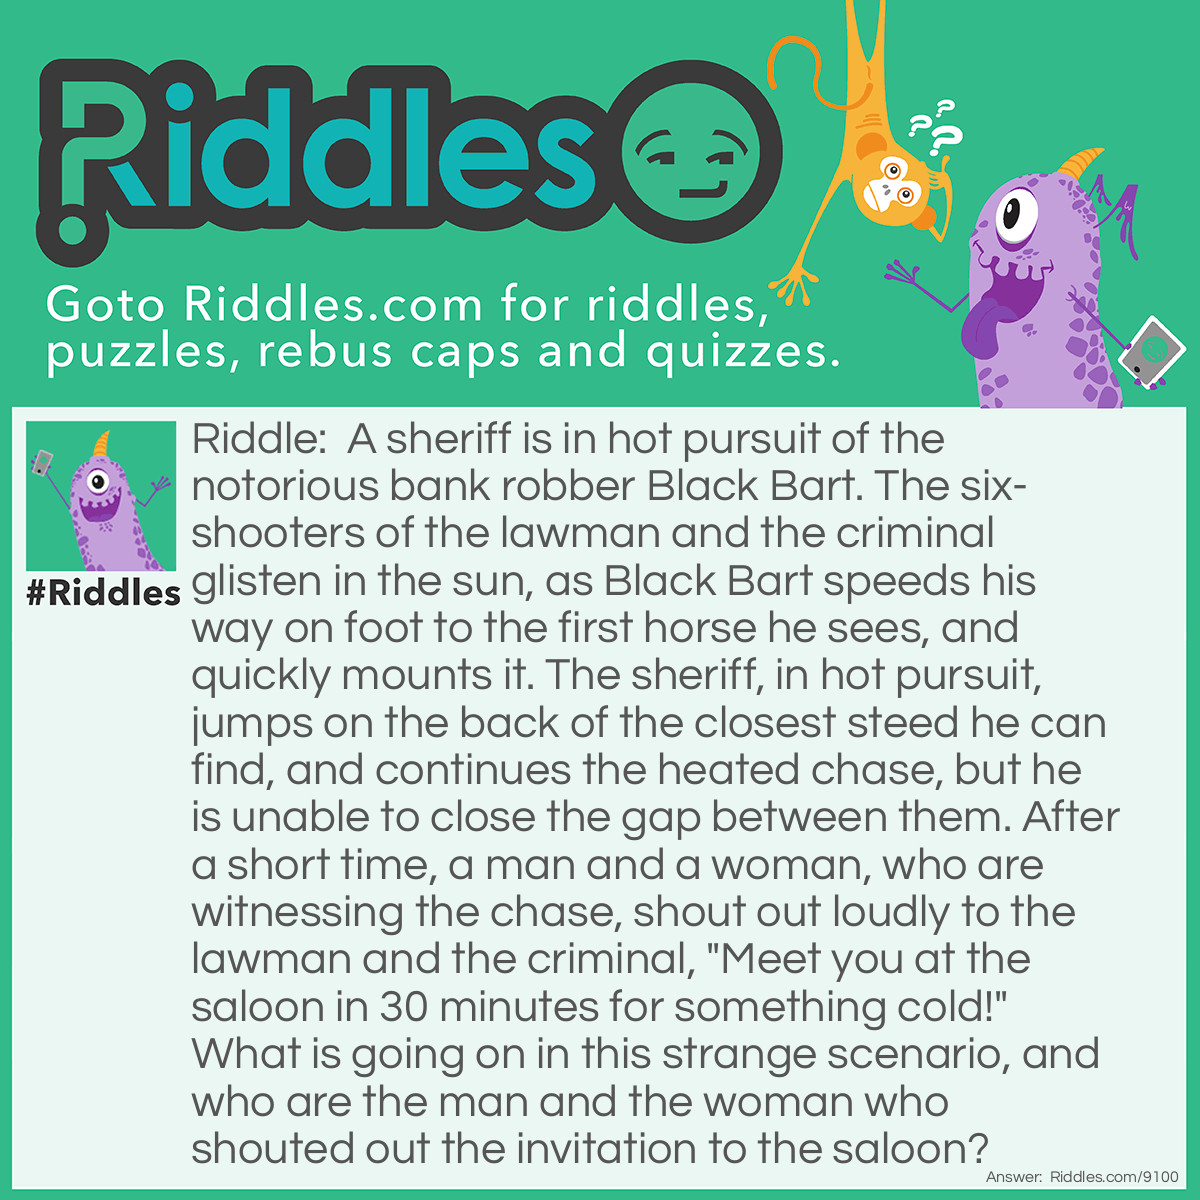 Riddle: A sheriff is in hot pursuit of the notorious bank robber Black Bart. The six-shooters of the lawman and the criminal glisten in the sun, as Black Bart speeds his way on foot to the first horse he sees, and quickly mounts it. The sheriff, in hot pursuit, jumps on the back of the closest steed he can find, and continues the heated chase, but he is unable to close the gap between them. After a short time, a man and a woman, who are witnessing the chase, shout out loudly to the lawman and the criminal, "Meet you at the saloon in 30 minutes for something cold!" What is going on in this strange scenario, and who are the man and the woman who shouted out the invitation to the saloon? Answer: The "sheriff" and "Black Bart" are two children pretending to be a lawman chasing an outlaw, and are riding horses on a merry-go-round at an amusement park or a western tourist town. The man and the woman are their parents who are inviting them to the "saloon" for some cold drinks or ice cream.